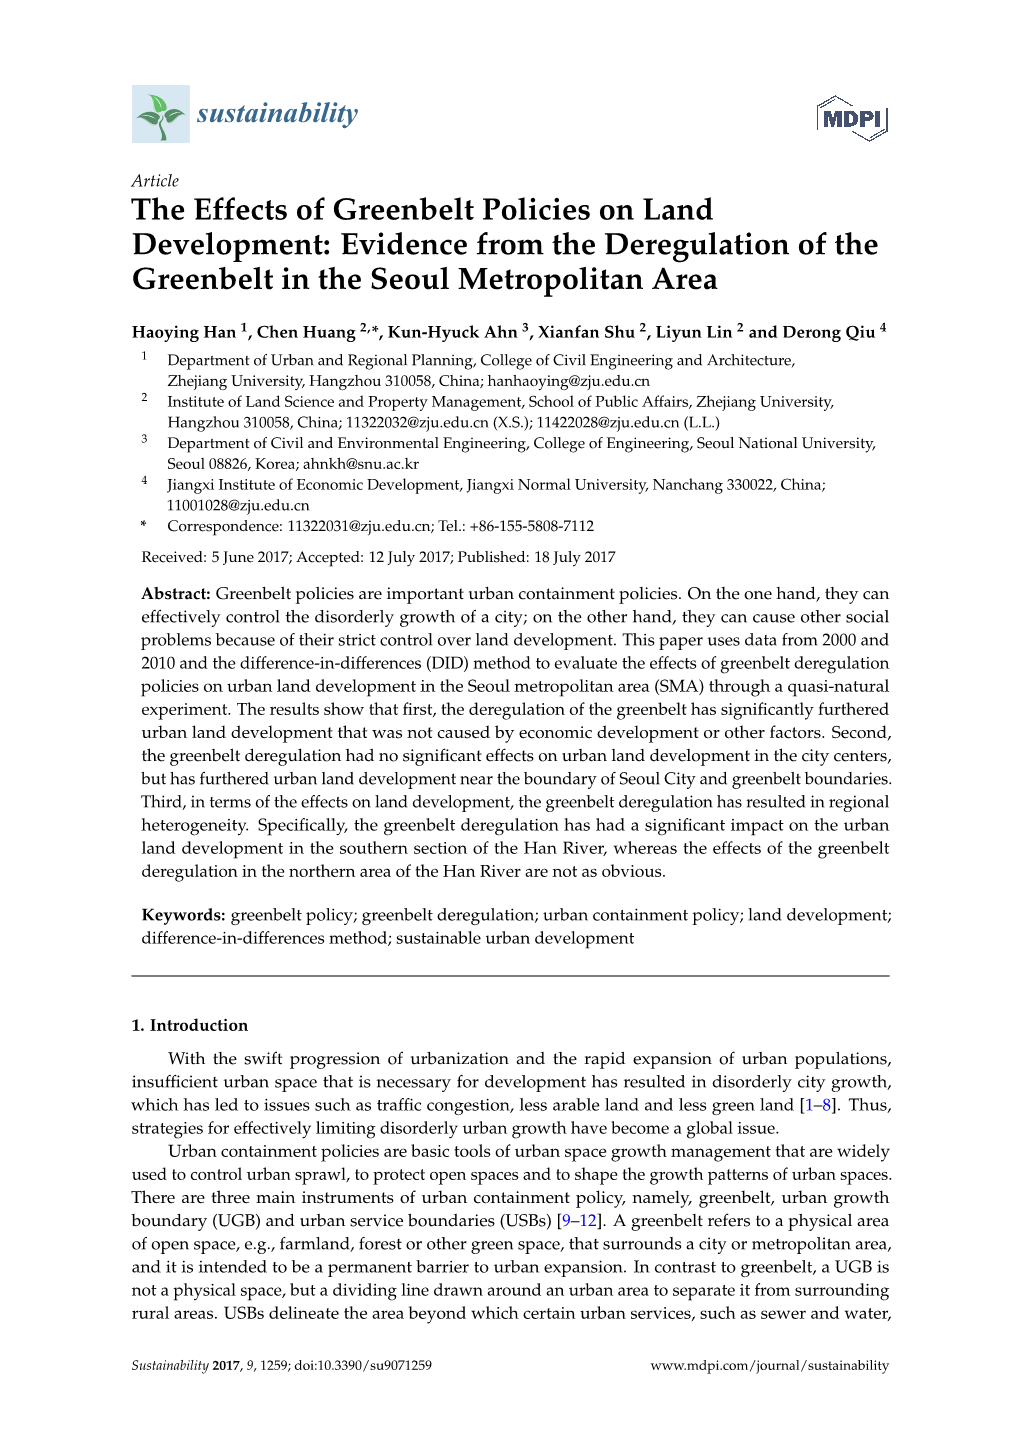 The Effects of Greenbelt Policies on Land Development: Evidence from the Deregulation of the Greenbelt in the Seoul Metropolitan Area